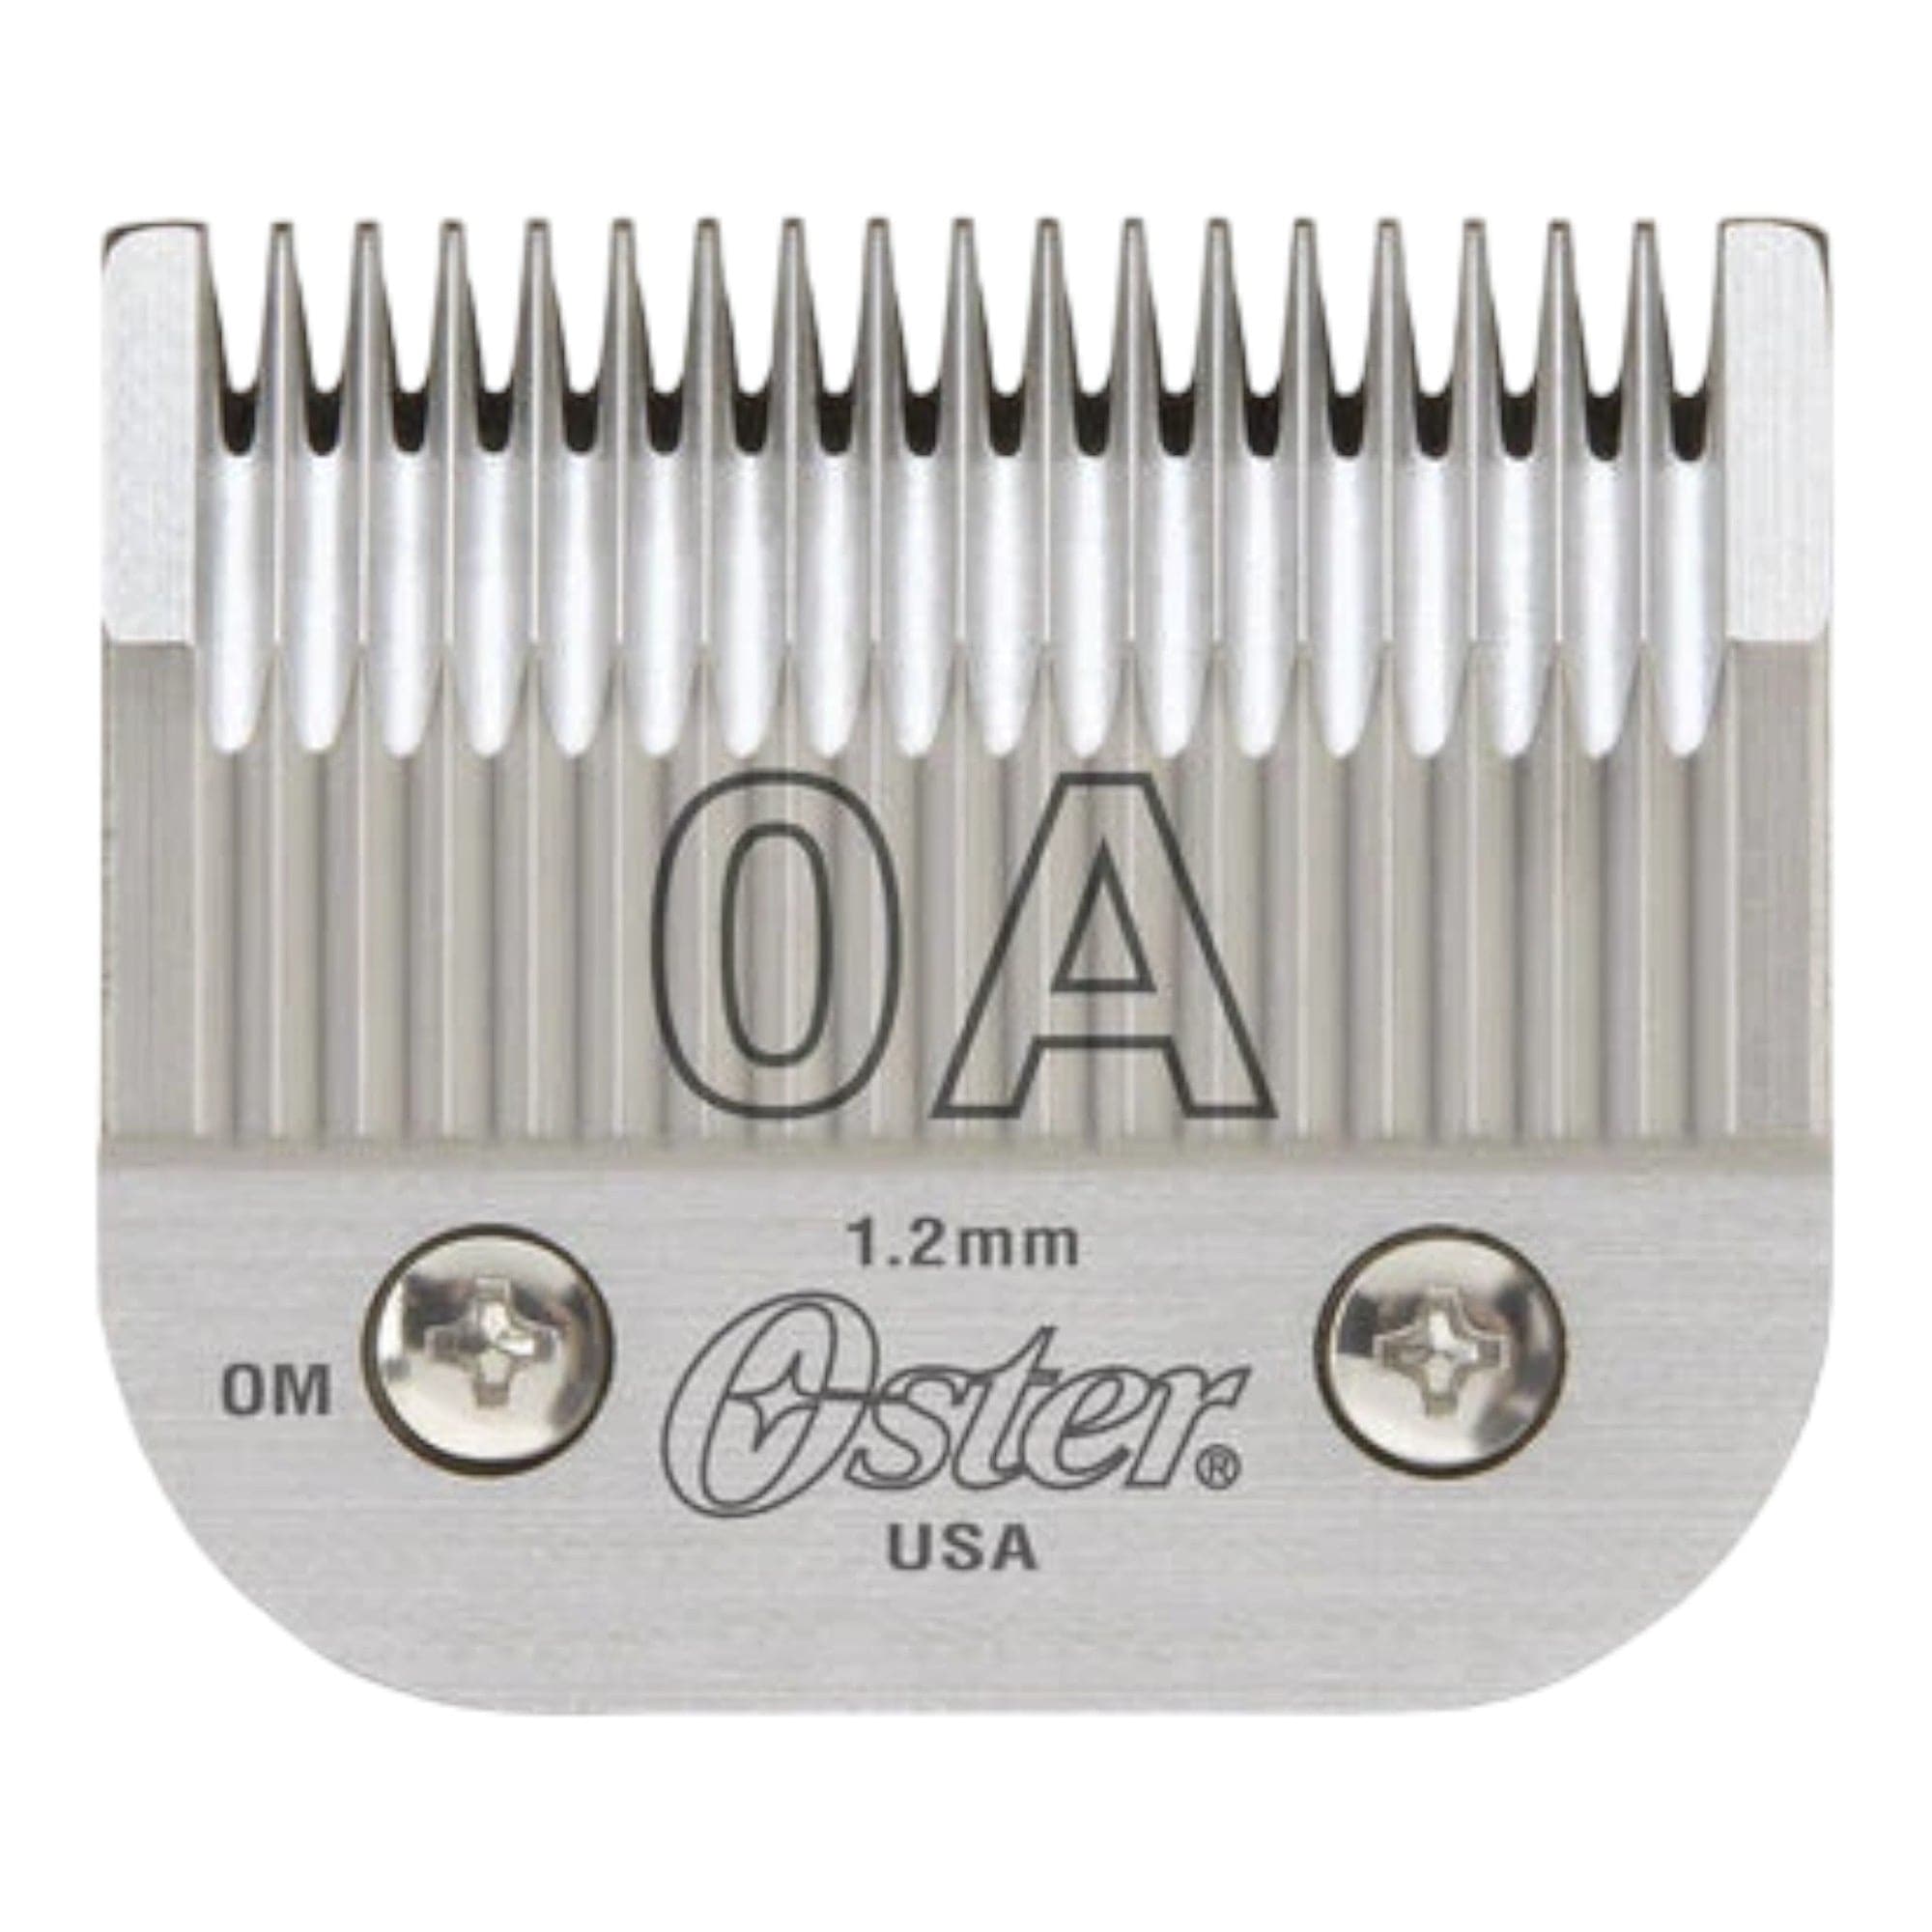 Oster - 076918-056 Detachable Blade Size 0A - 1.2mm